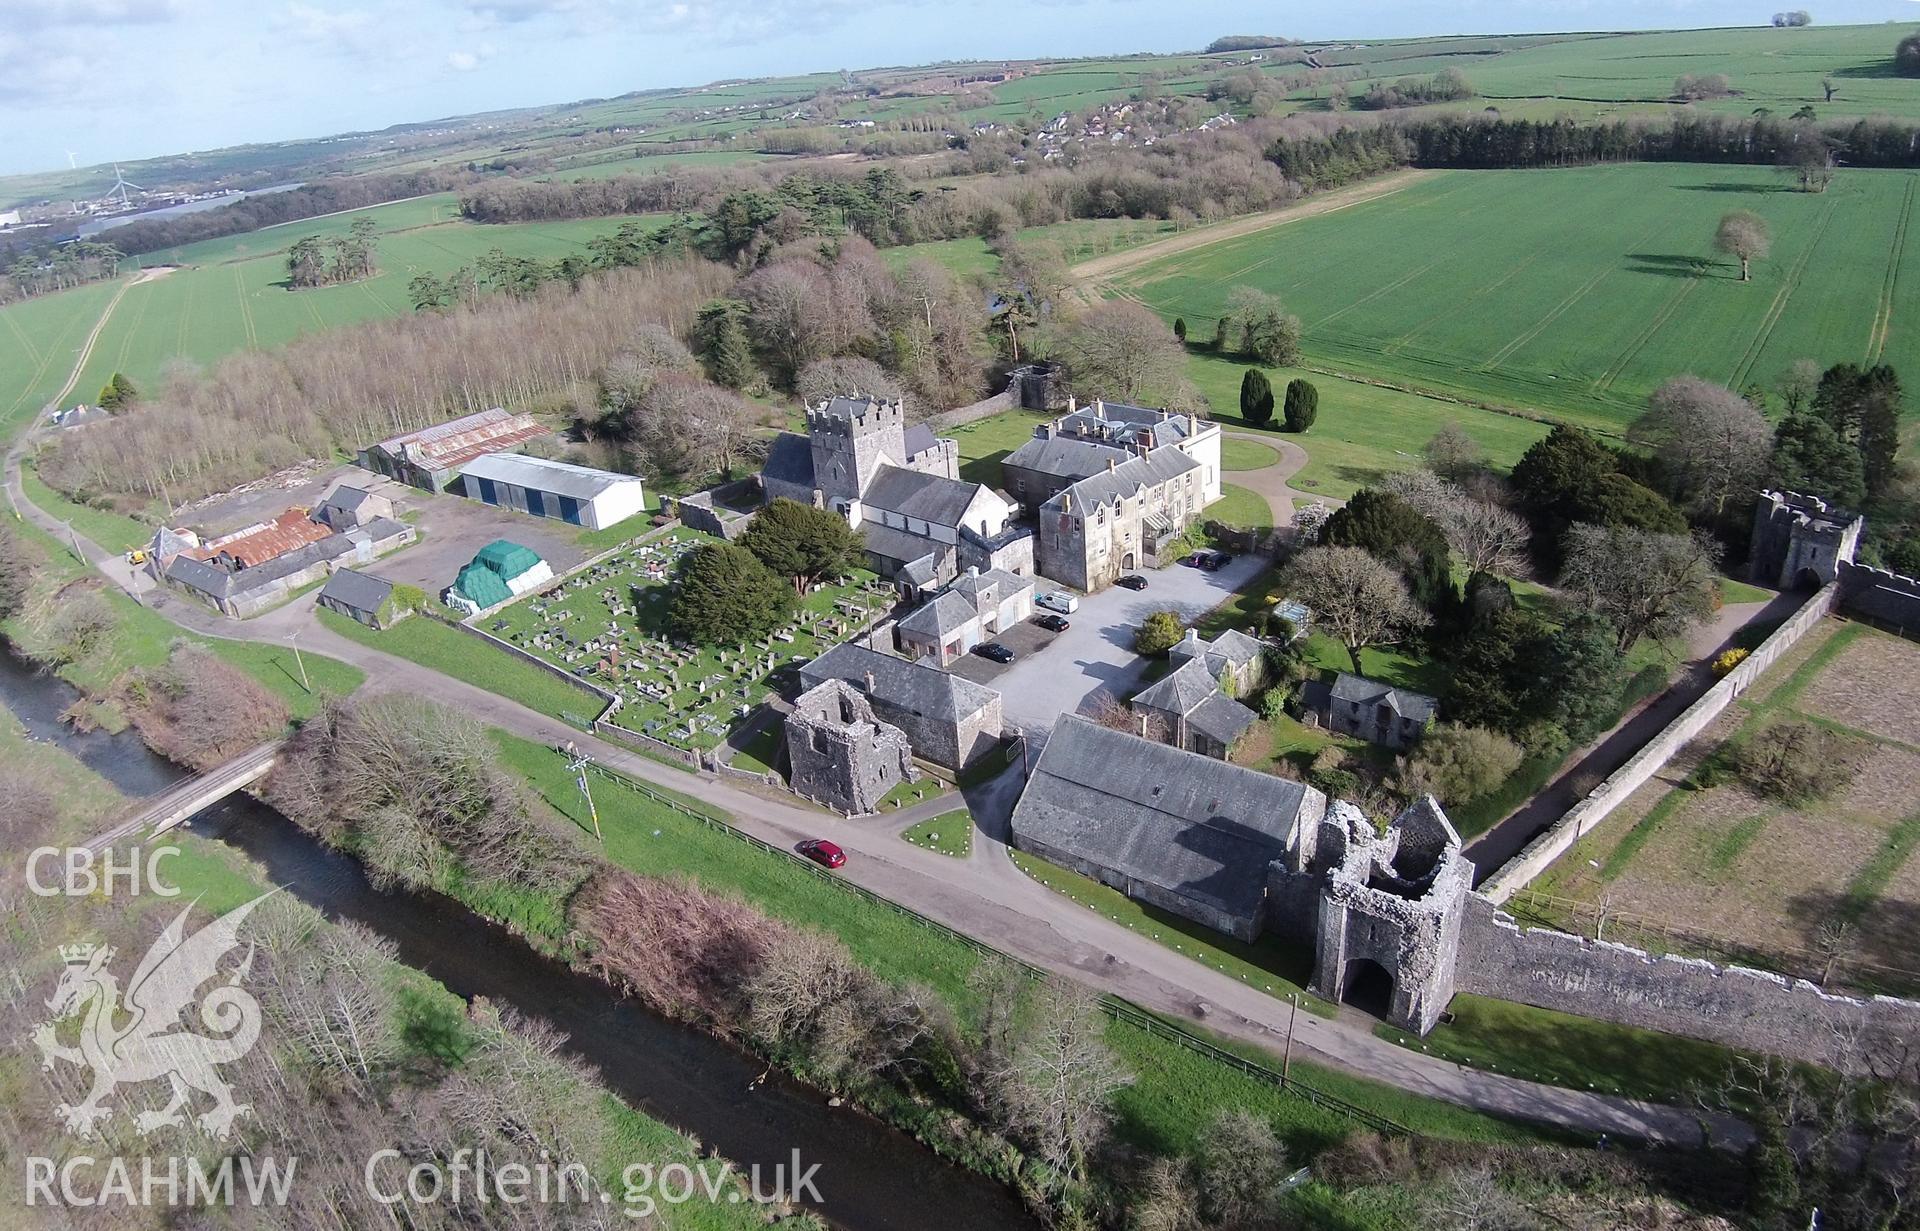 Aerial photograph showing Ewenny taken by Paul Davis, 11th April 2015.